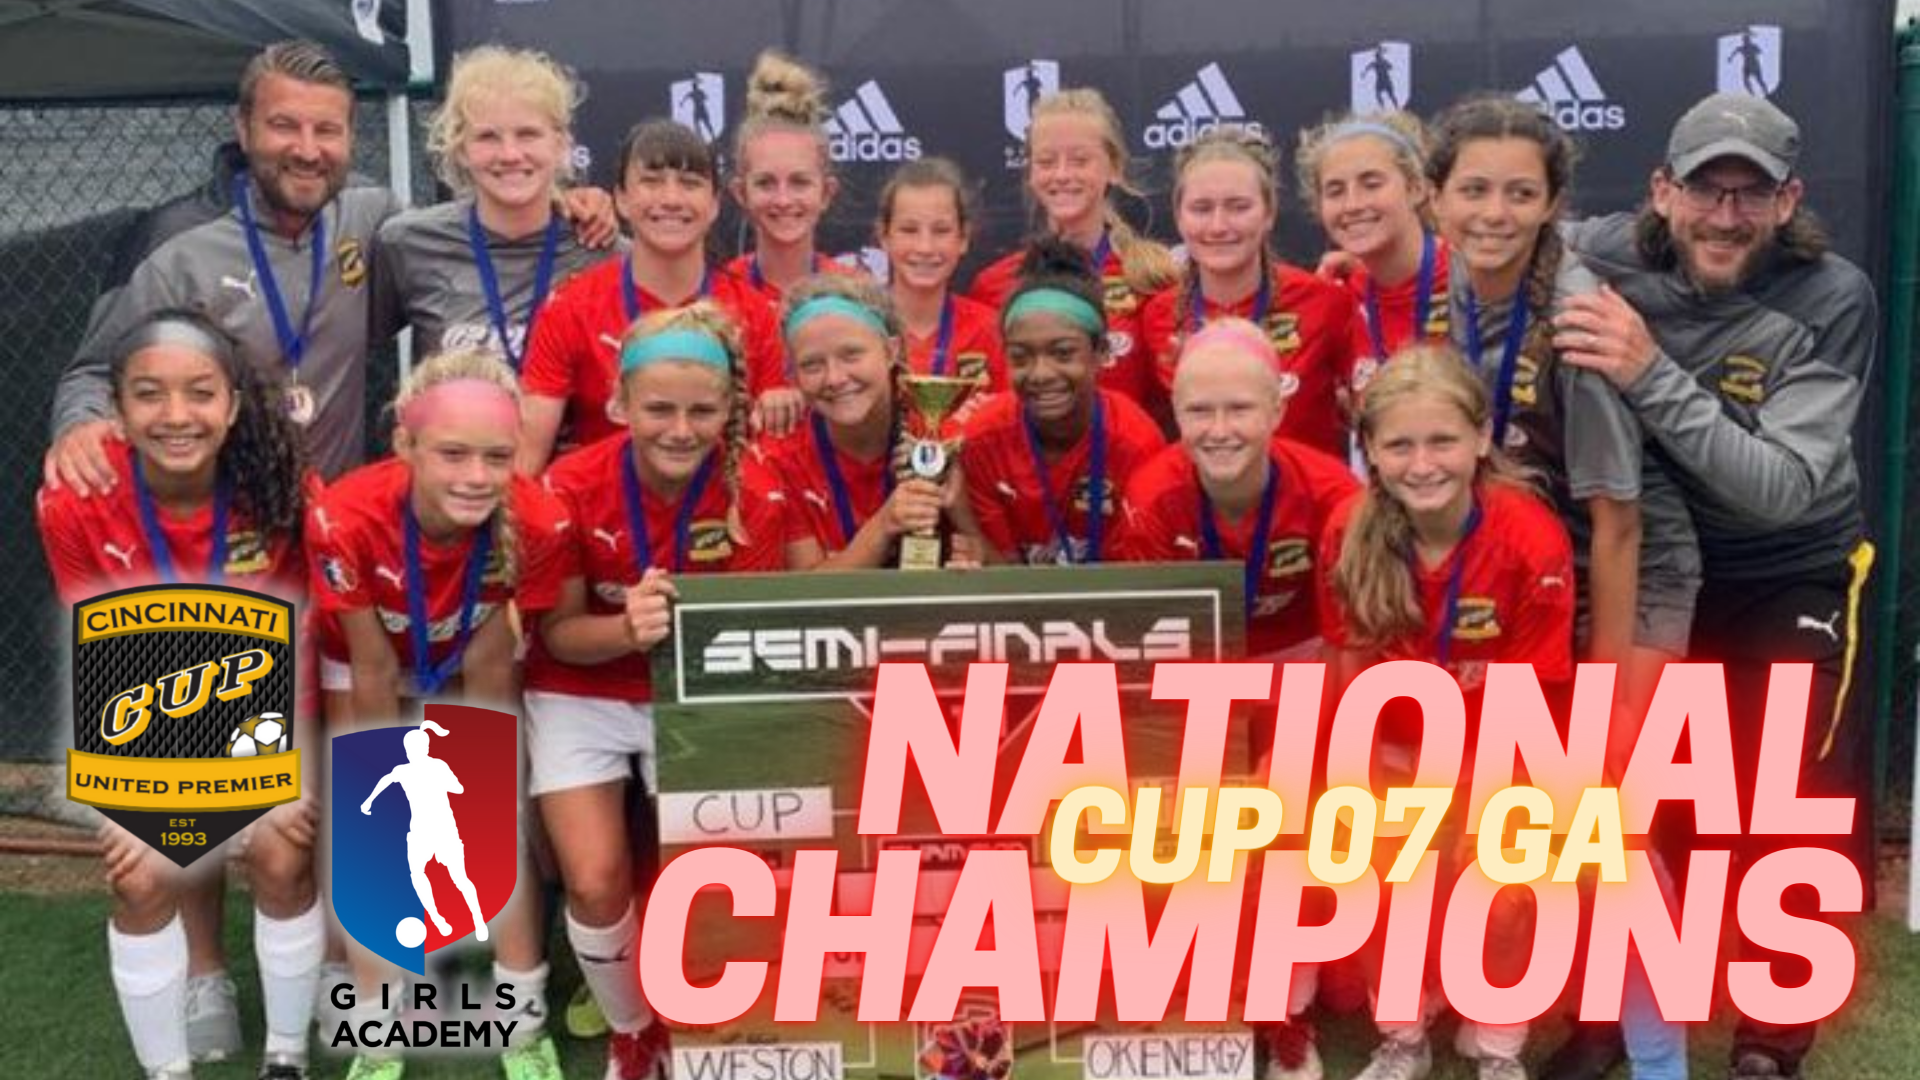 CUP 07 GA Crowned National Champions